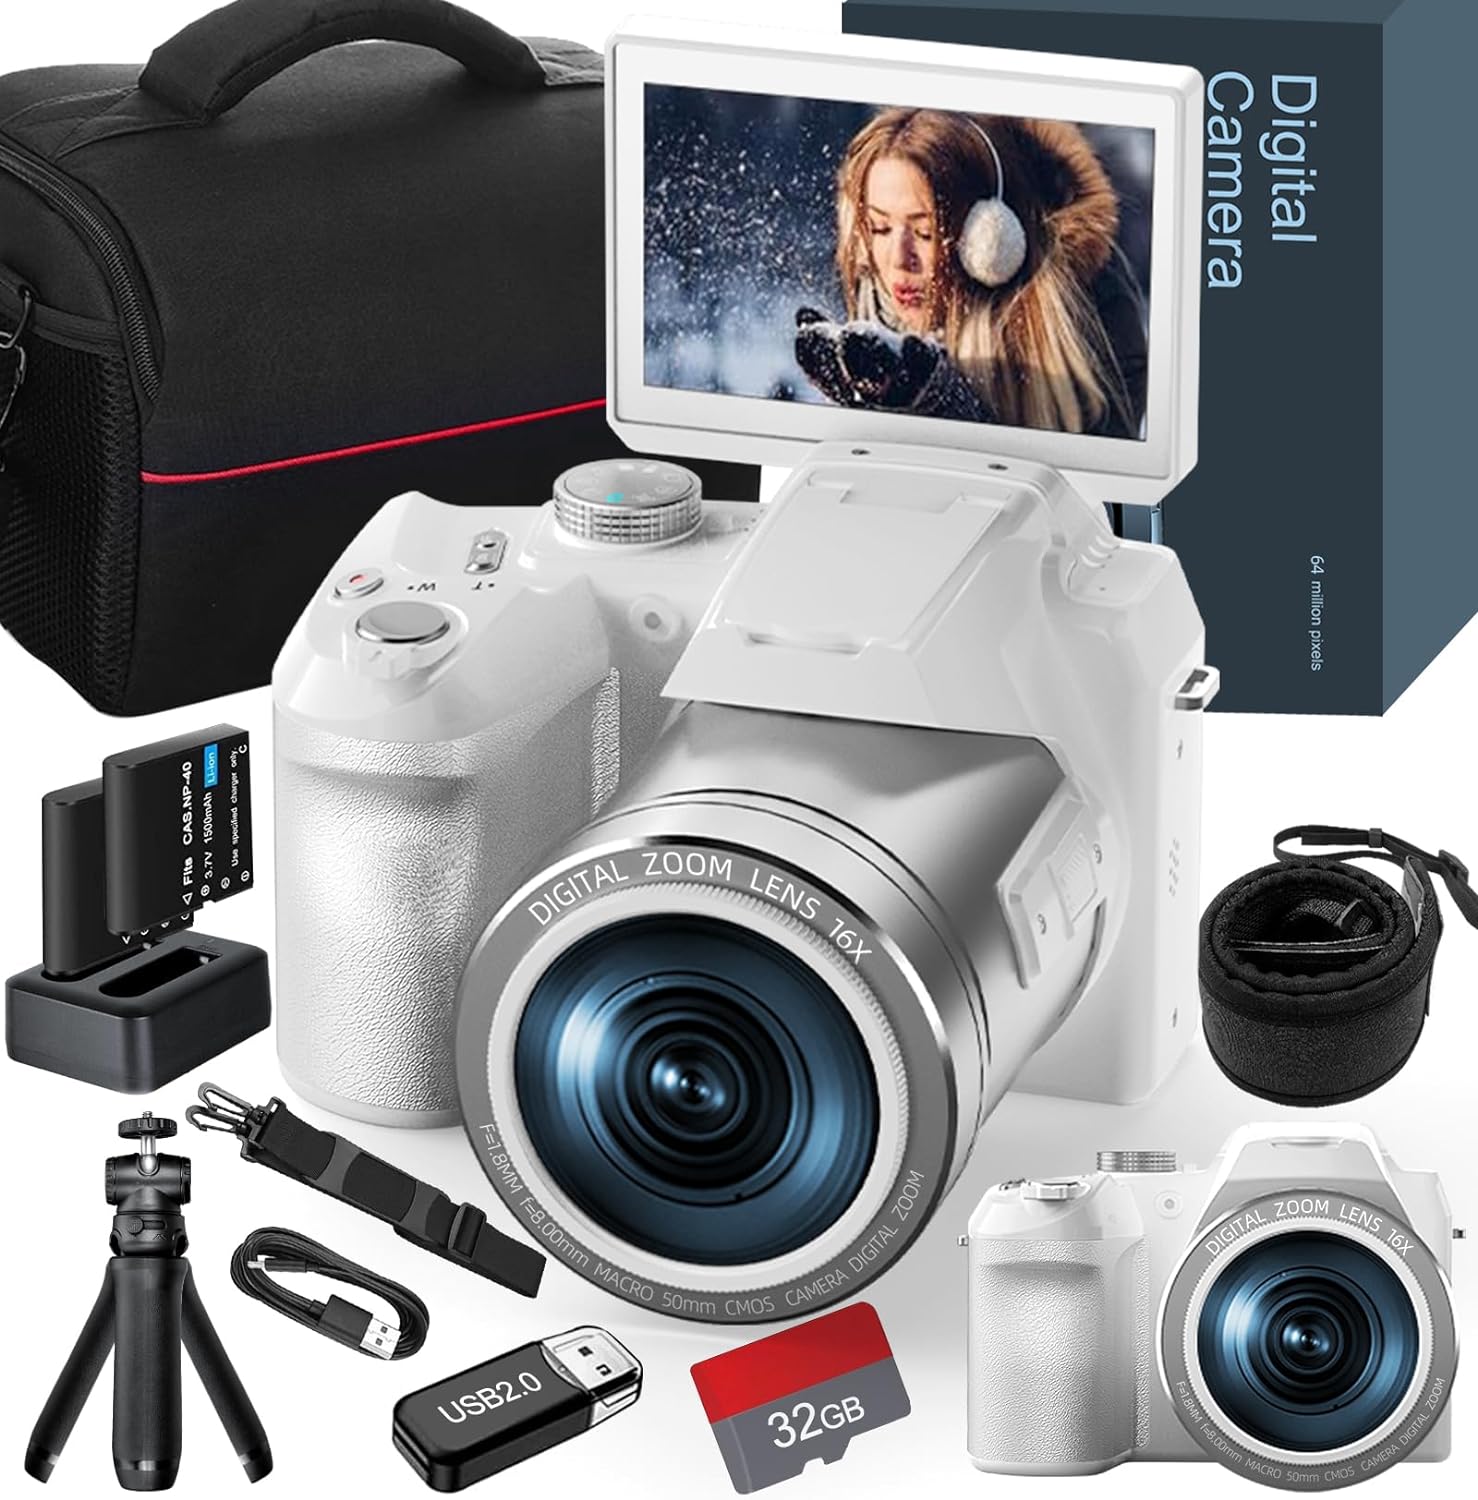 NBD Digital Camera for photography,4K 64MP Video Camera Youtube Vlogging Camera with 16X Digital Zoom and 32GB SD Card,White